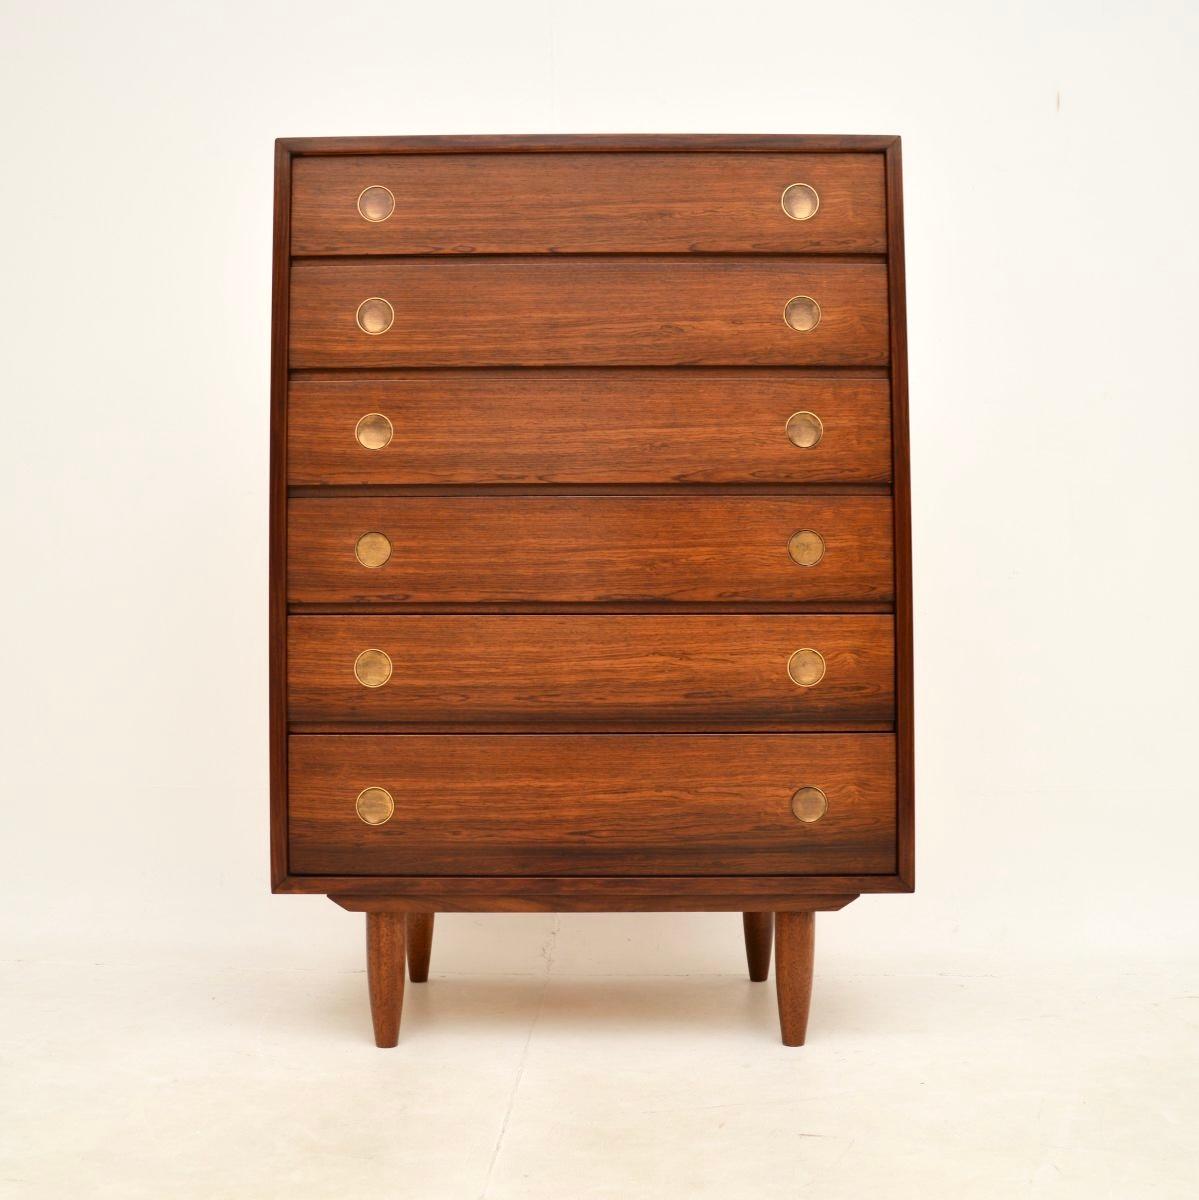 A stylish and extremely well made Danish vintage chest of drawers. This was made by Dyrlund, it dates from around the 1960’s.

The quality is outstanding, this sits on tapered legs and has lovely brass circular handles. The grain patterns and colour